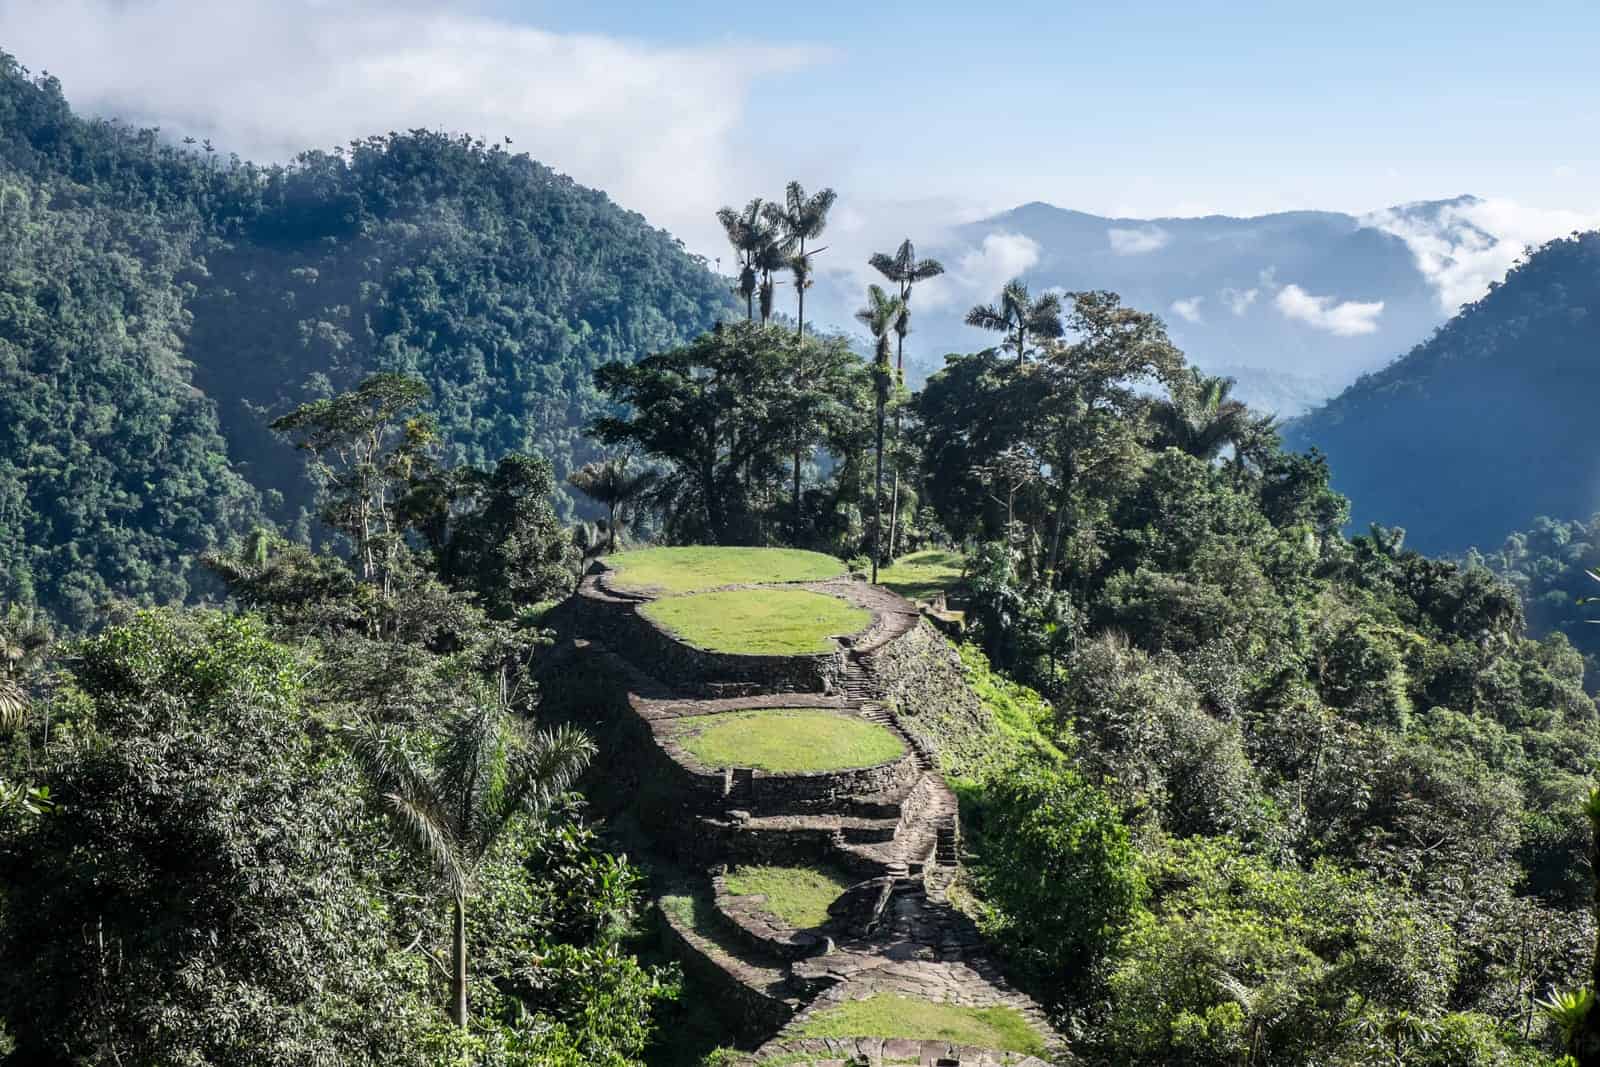 View of the grass-filled large stone terraces of the Lost City Trek Ciudad Perdida